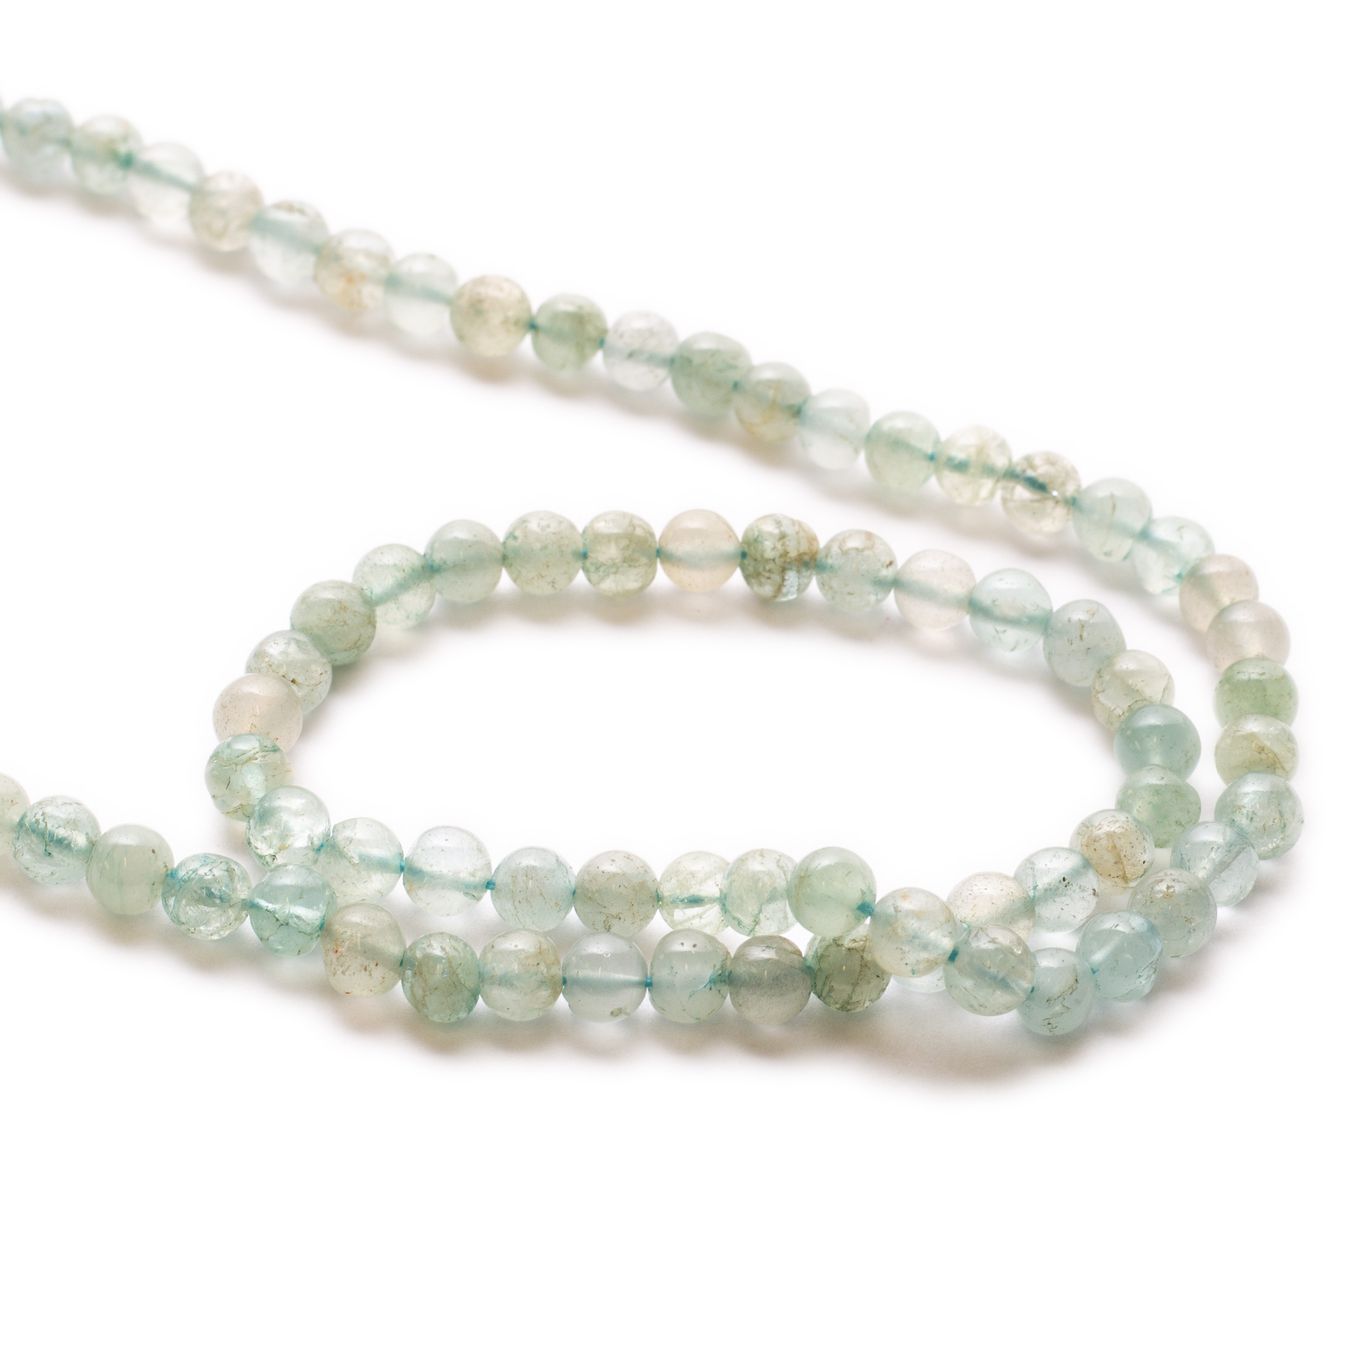 Aquamarine Round Beads - Approx From 3mm